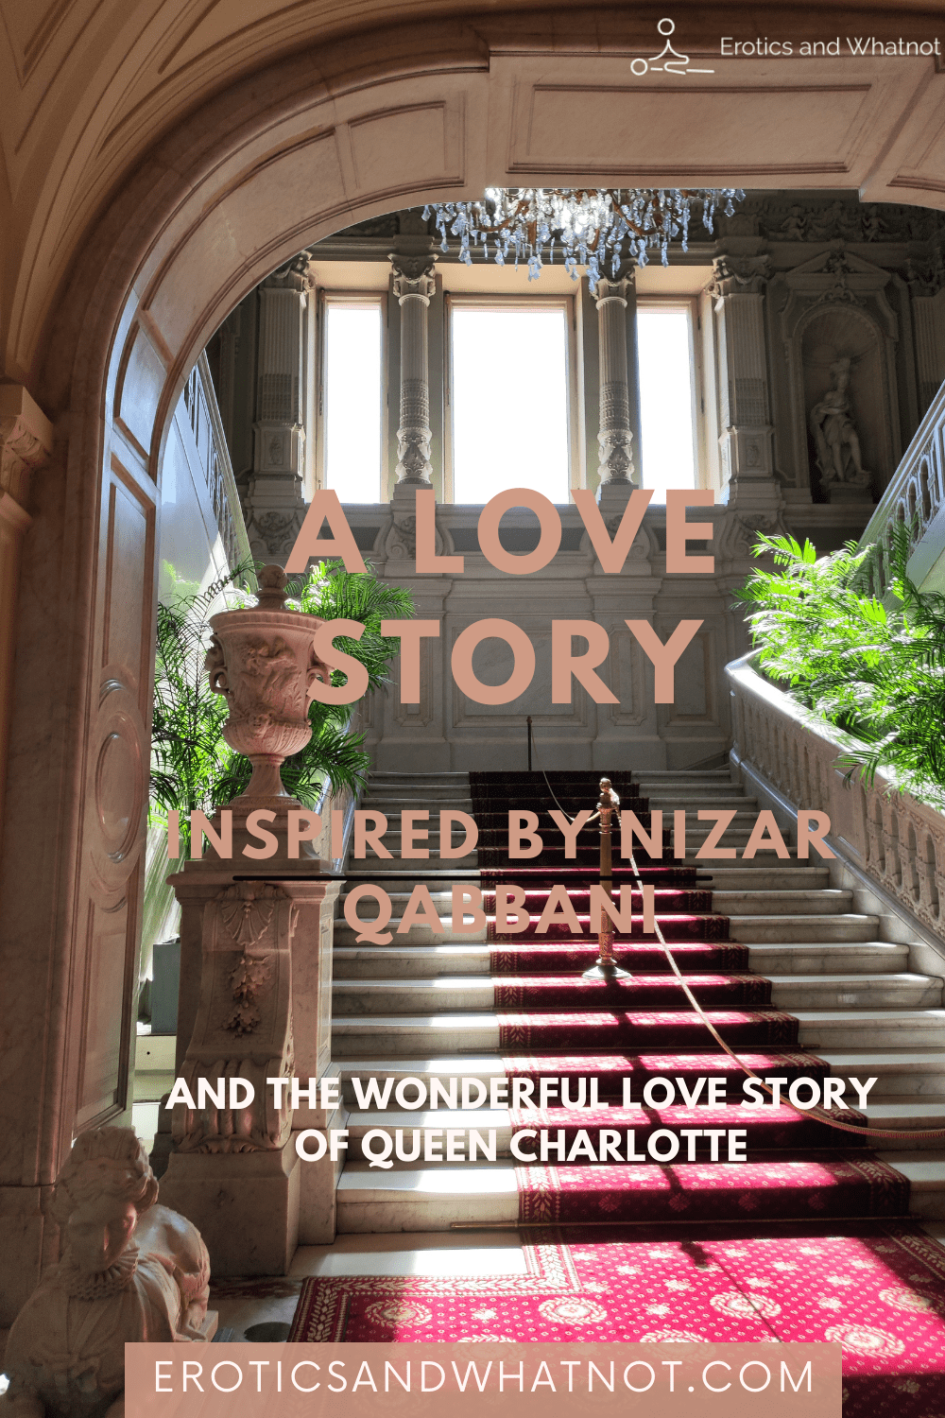 An image of a royal staircase with red carpet in the middle with the words ,"A love story inspired by Nizar Qabbani and the wonderful love story of Queen charlotte." with the logo of Erotics and Whatnot on it.